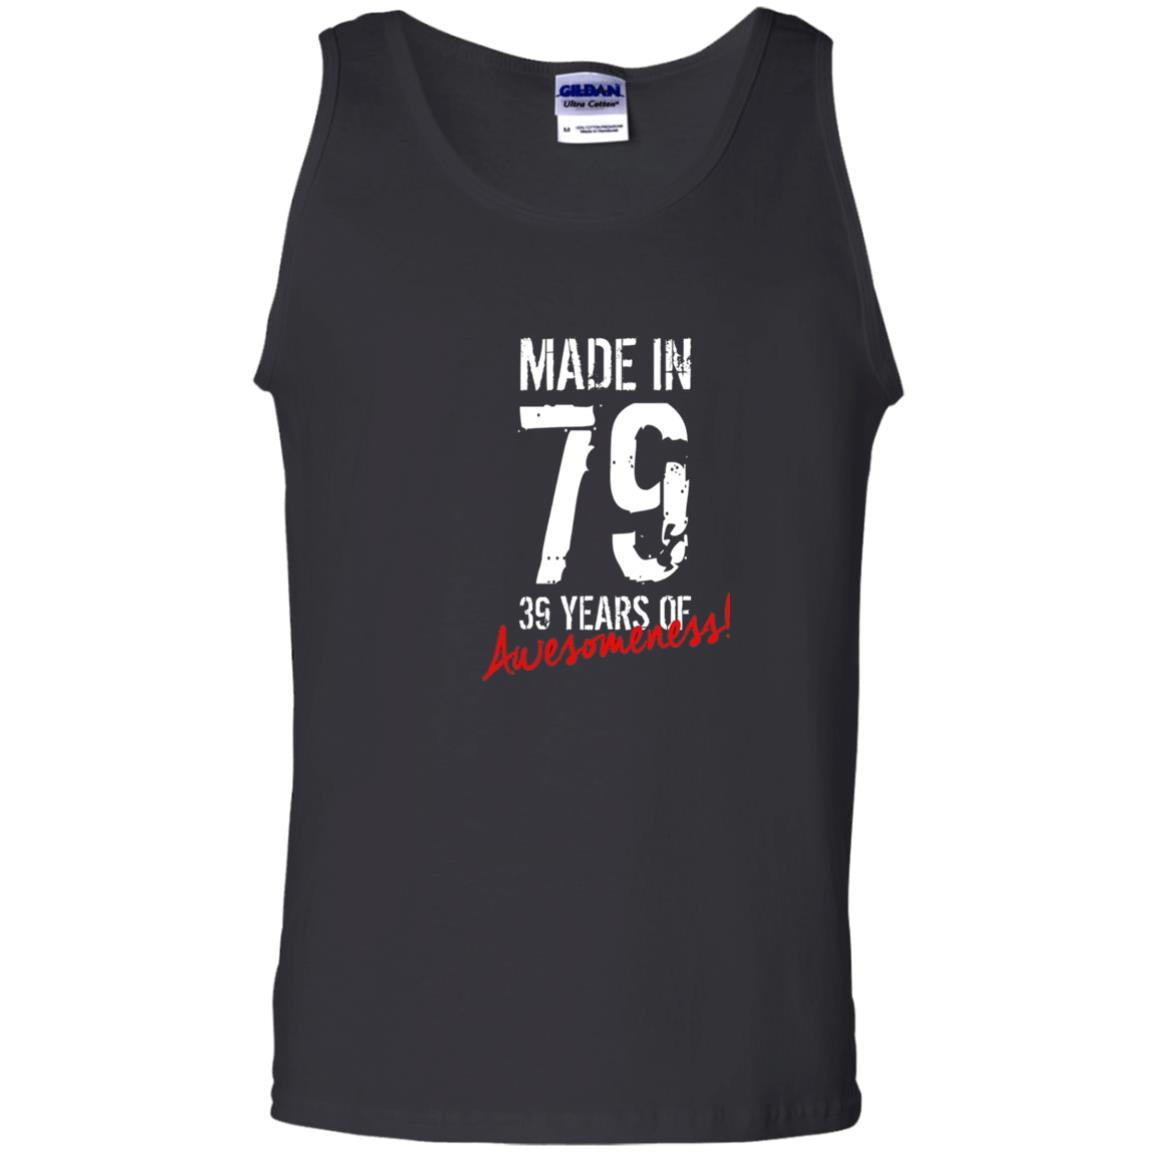 Made In 79 39 Years Of Awesomeness 39th Birthday T-shirt